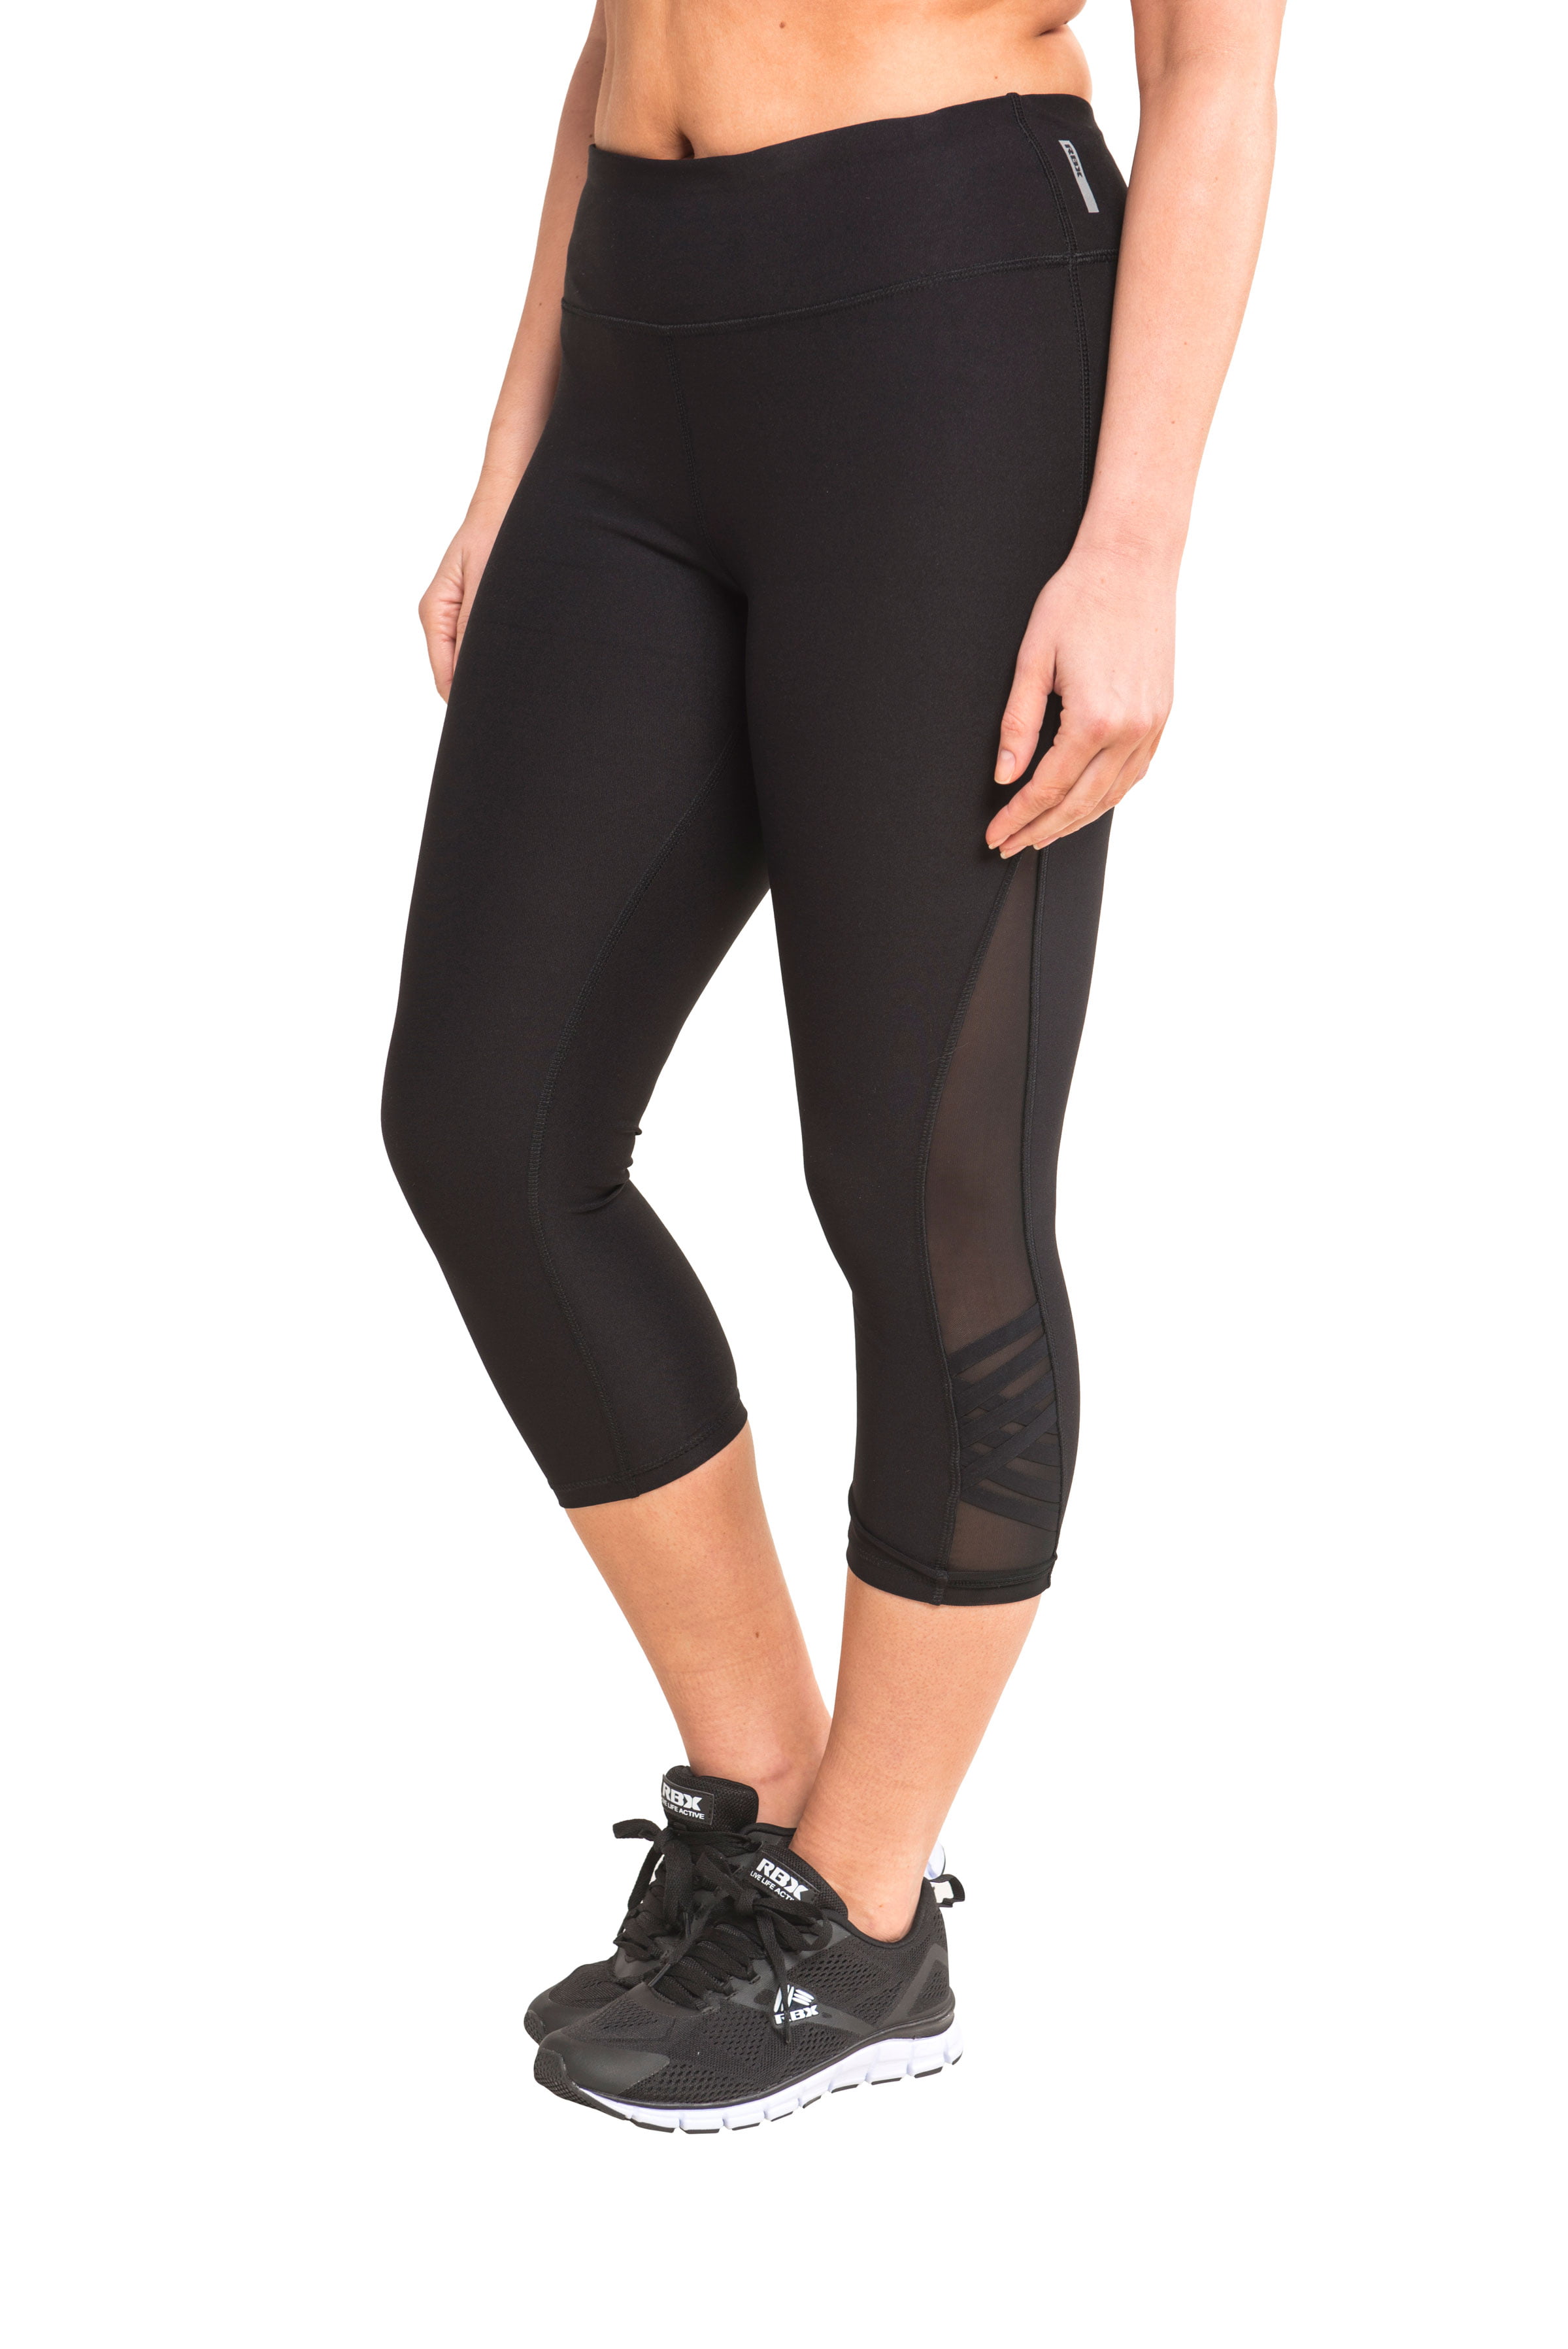 RBX Active Women's Plus Size Stretch Ankle/Full Length Workout Running Gym  Yoga Leggings